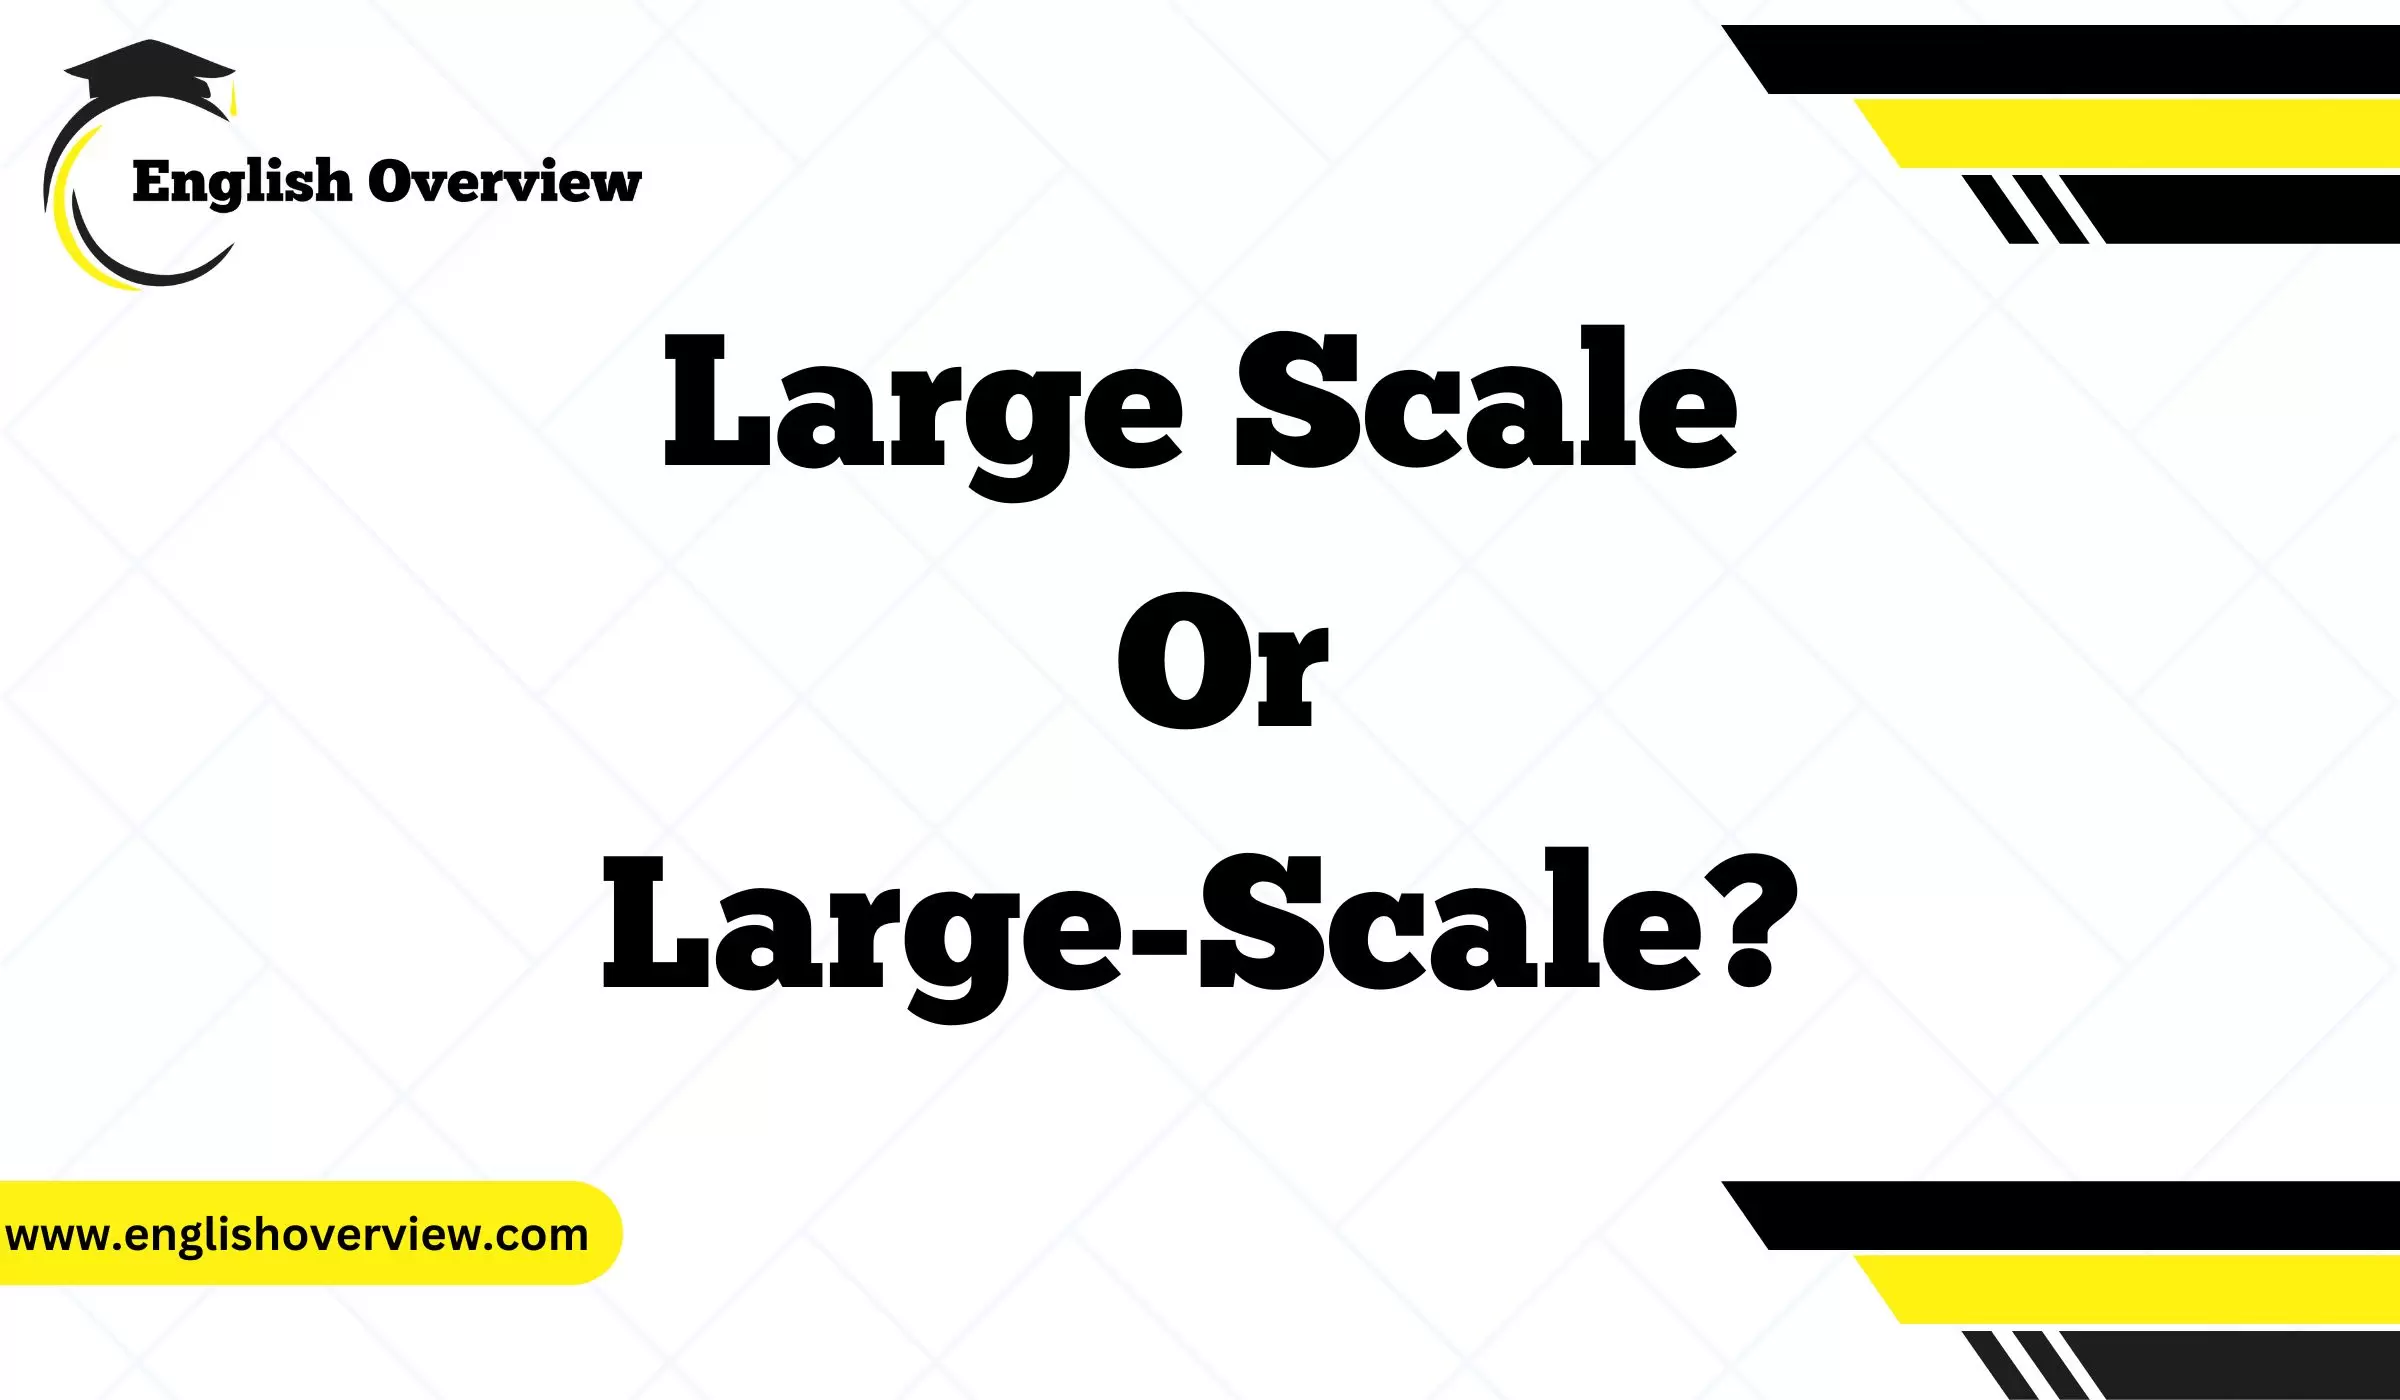 Large Scale or Large-Scale